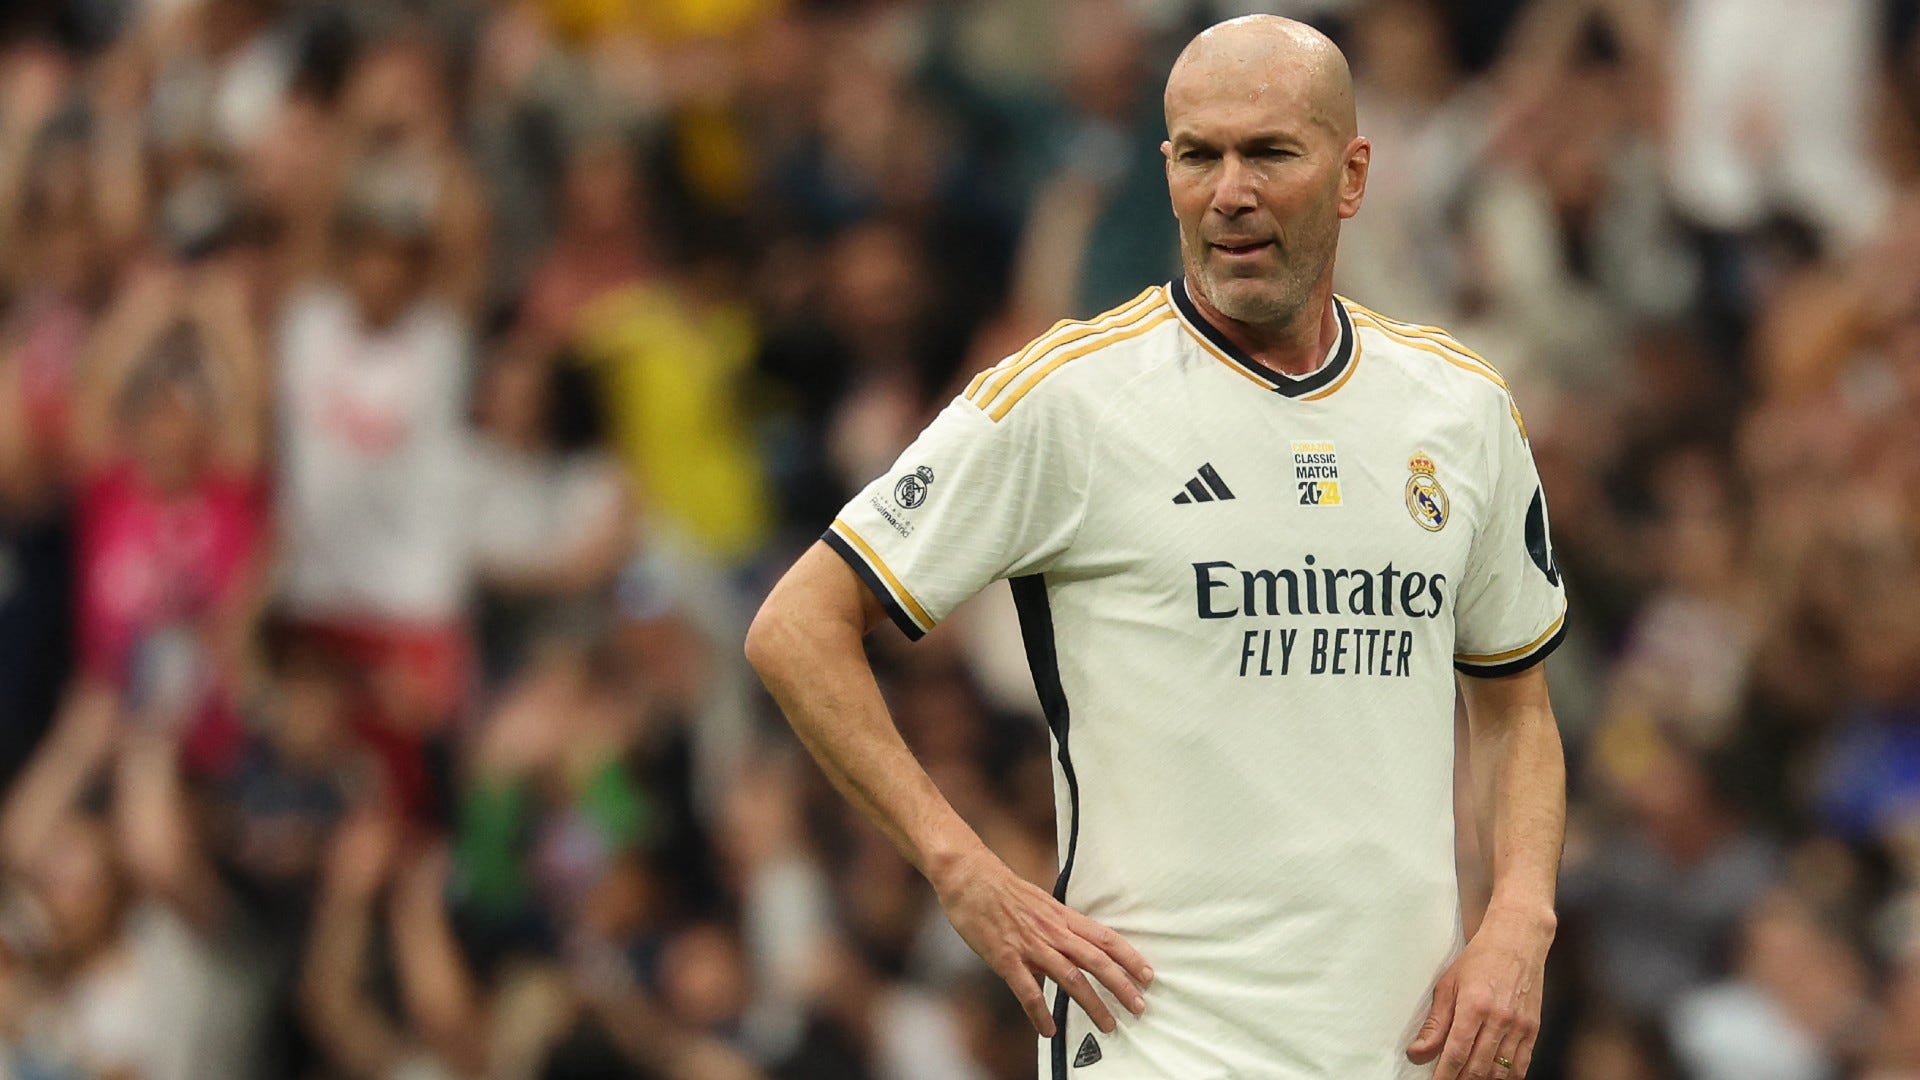 VIDEO: Zizou’s still got it! Zinedine Zidane shows off incredible link-up with Raul as Real Madrid greats Iker Casillas, Luis Figo & more feature in legends match